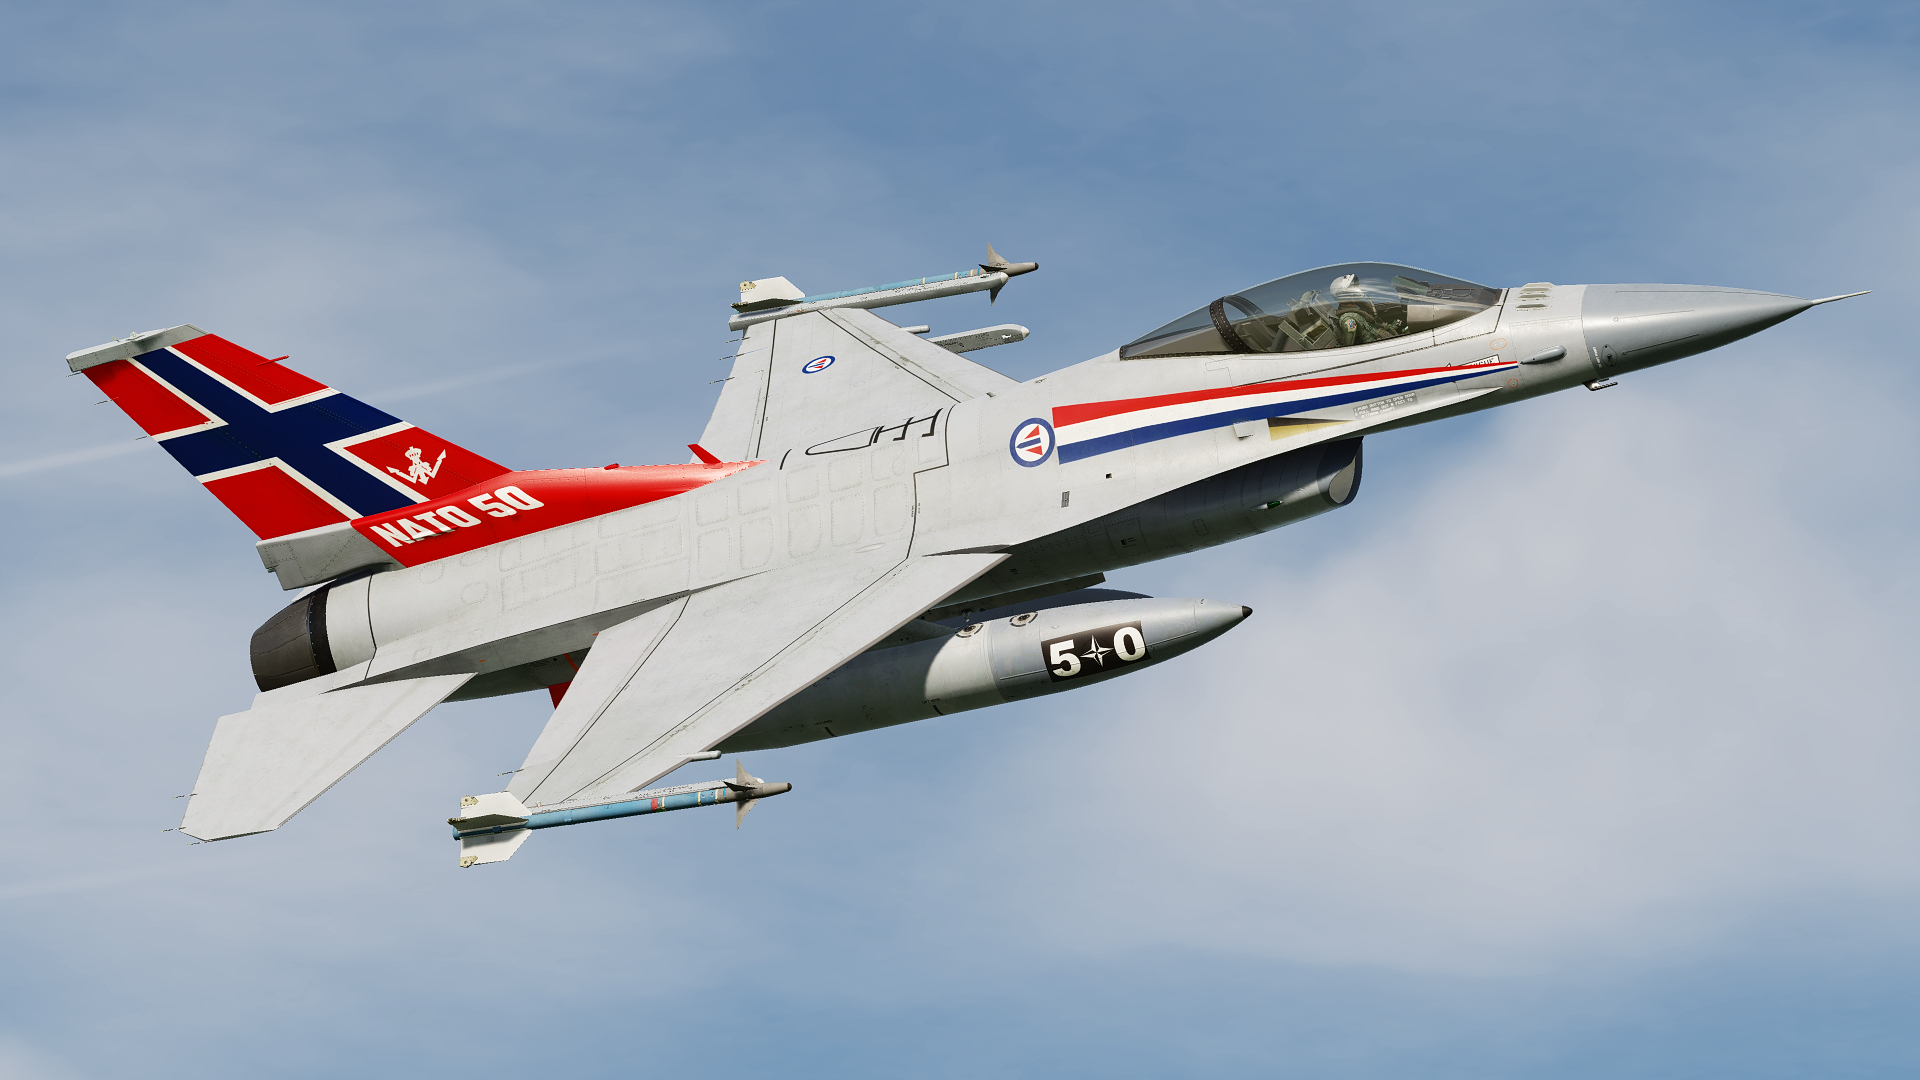 NATO 50th Anniversary - Royal Norwegian Air Force (RNoAF) F-16